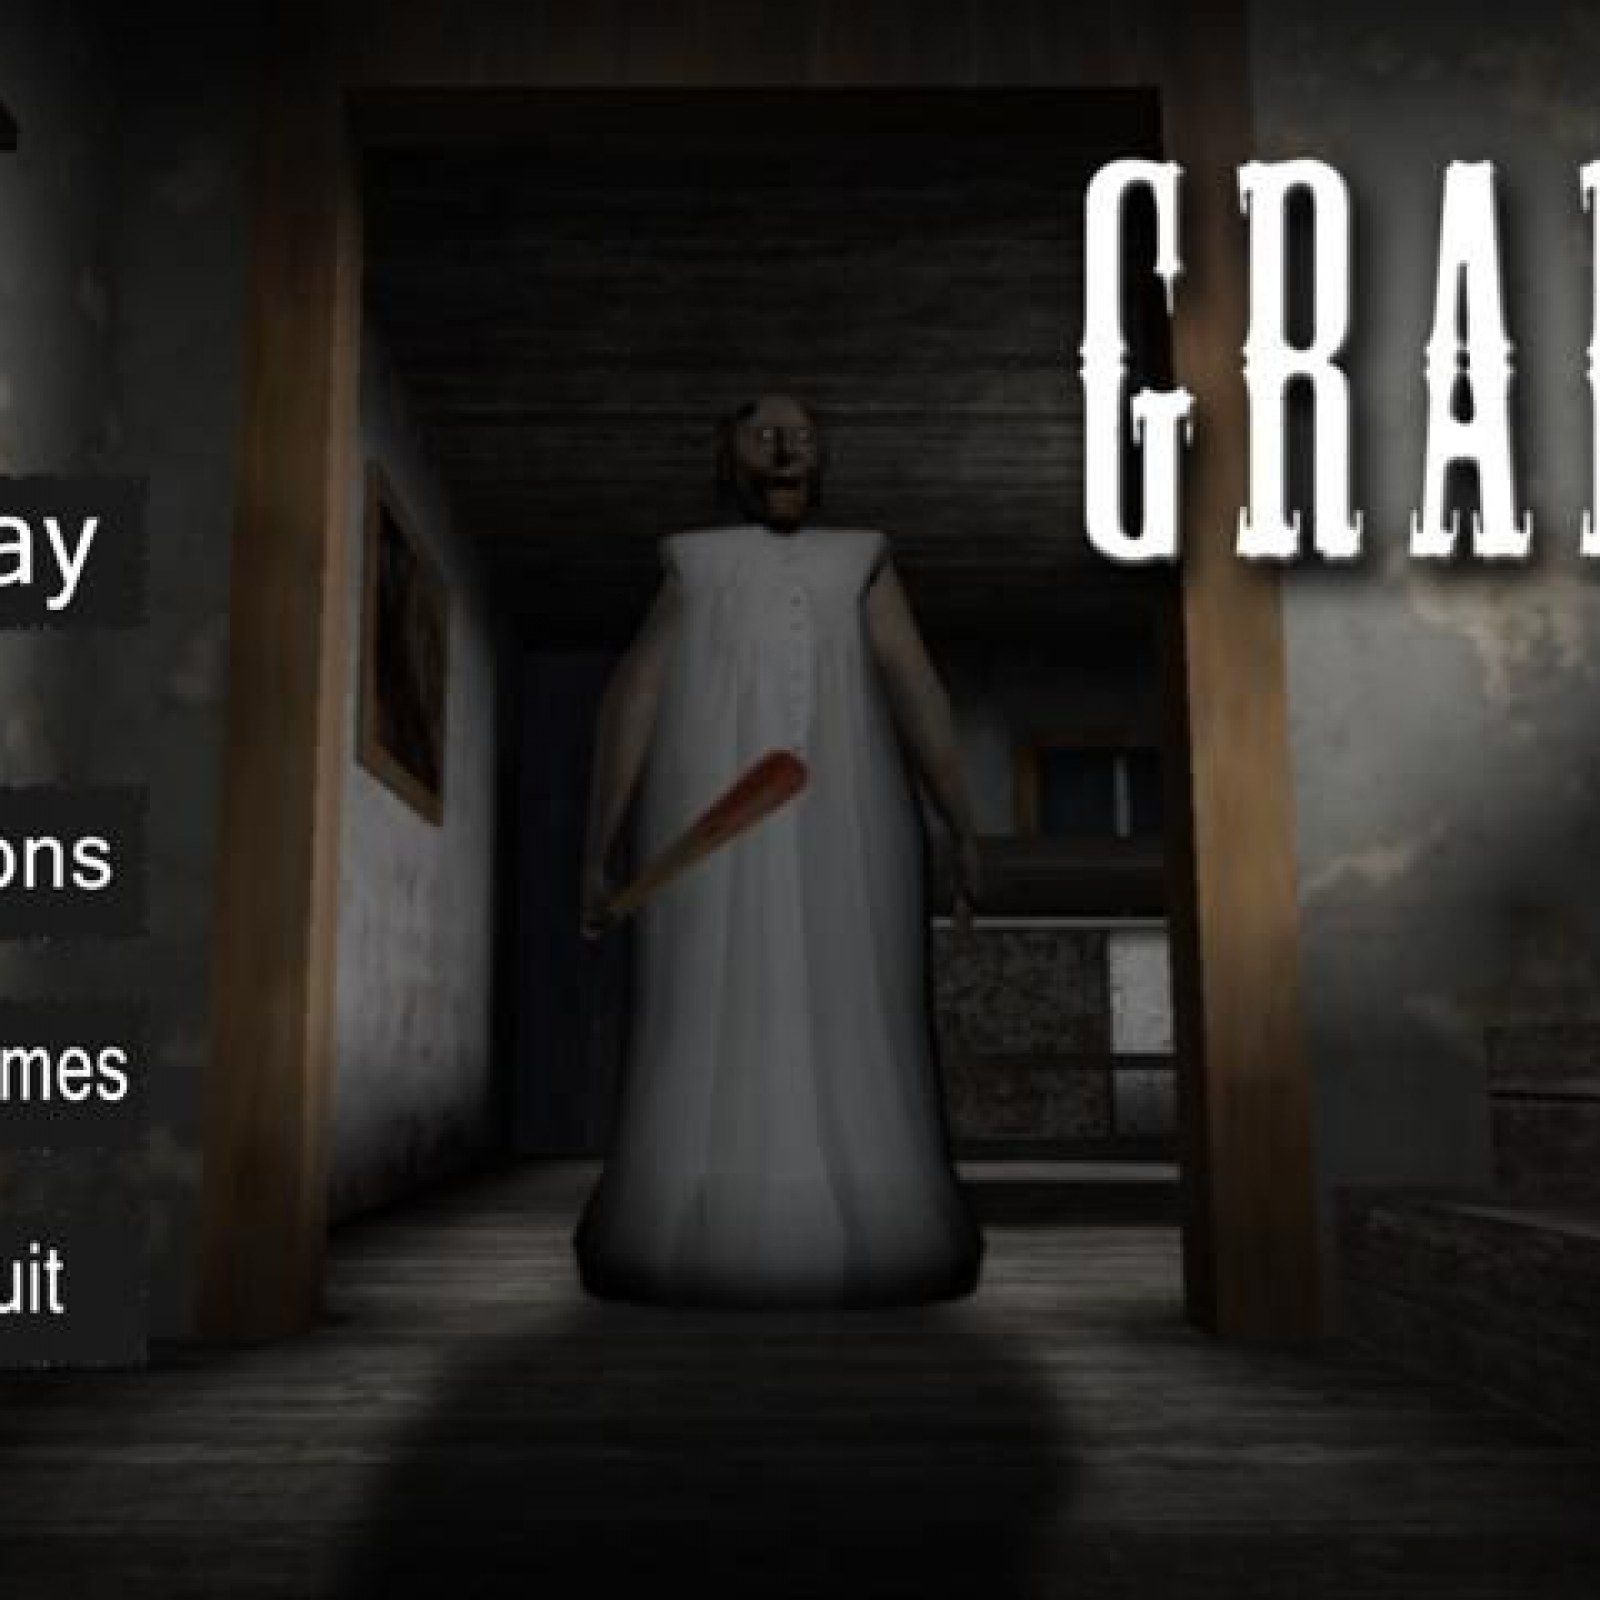 How To Beat Granny Horror Game Tips Steps Strategy For Getting Out Of The House Alive - codes for granny game on roblox